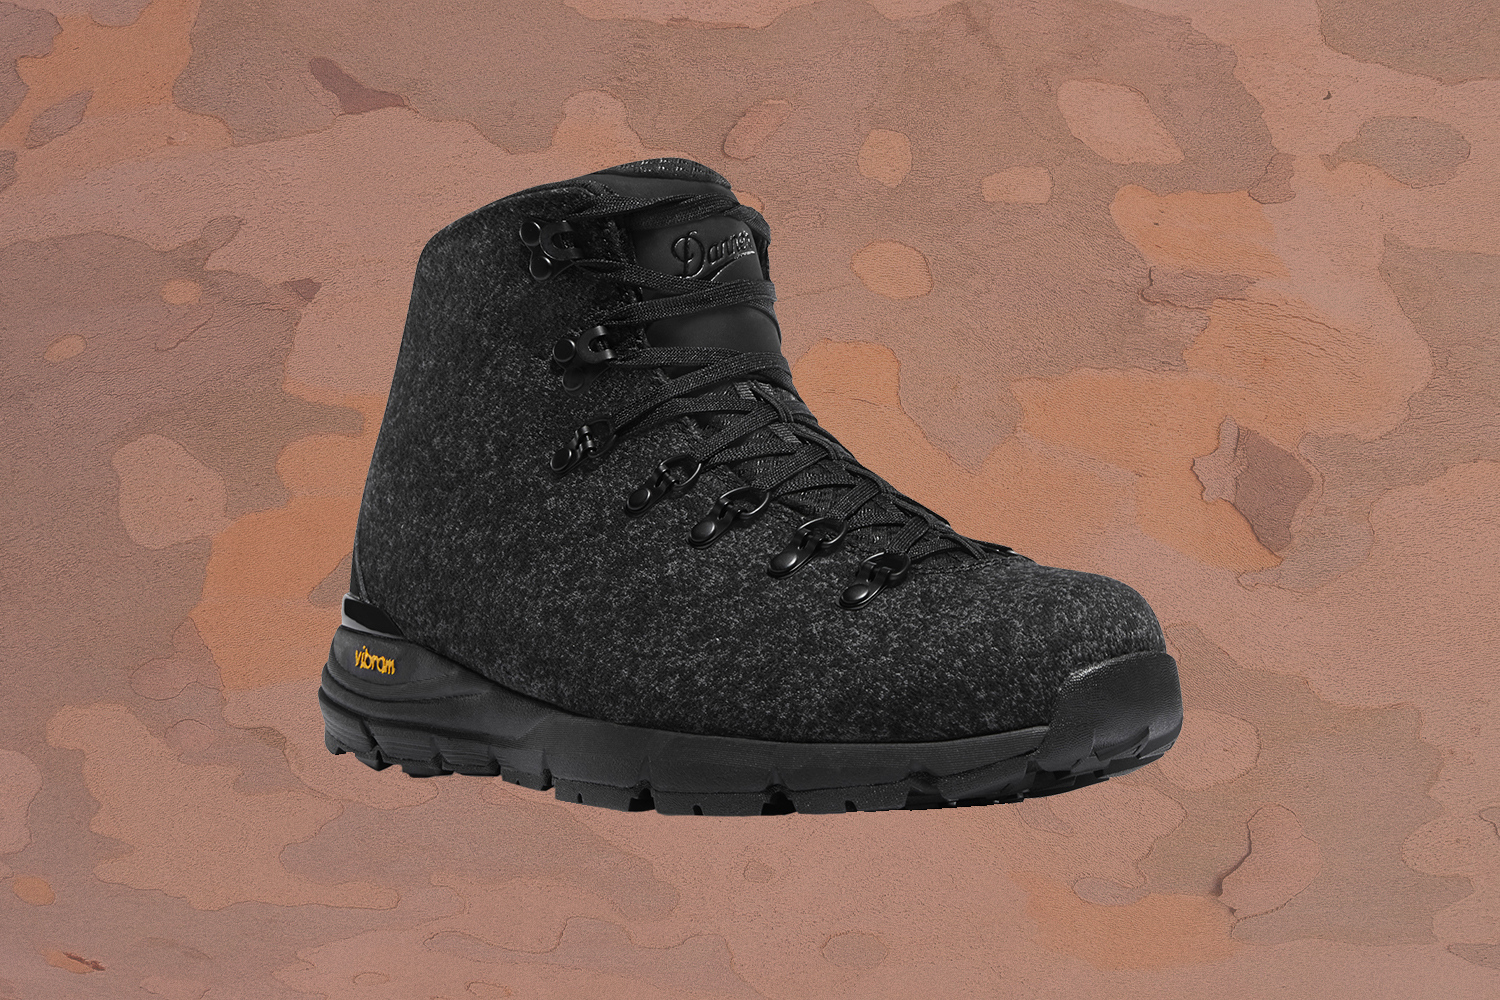 Take Up to 50% Off Danner Hiking Boots Today Only - InsideHook